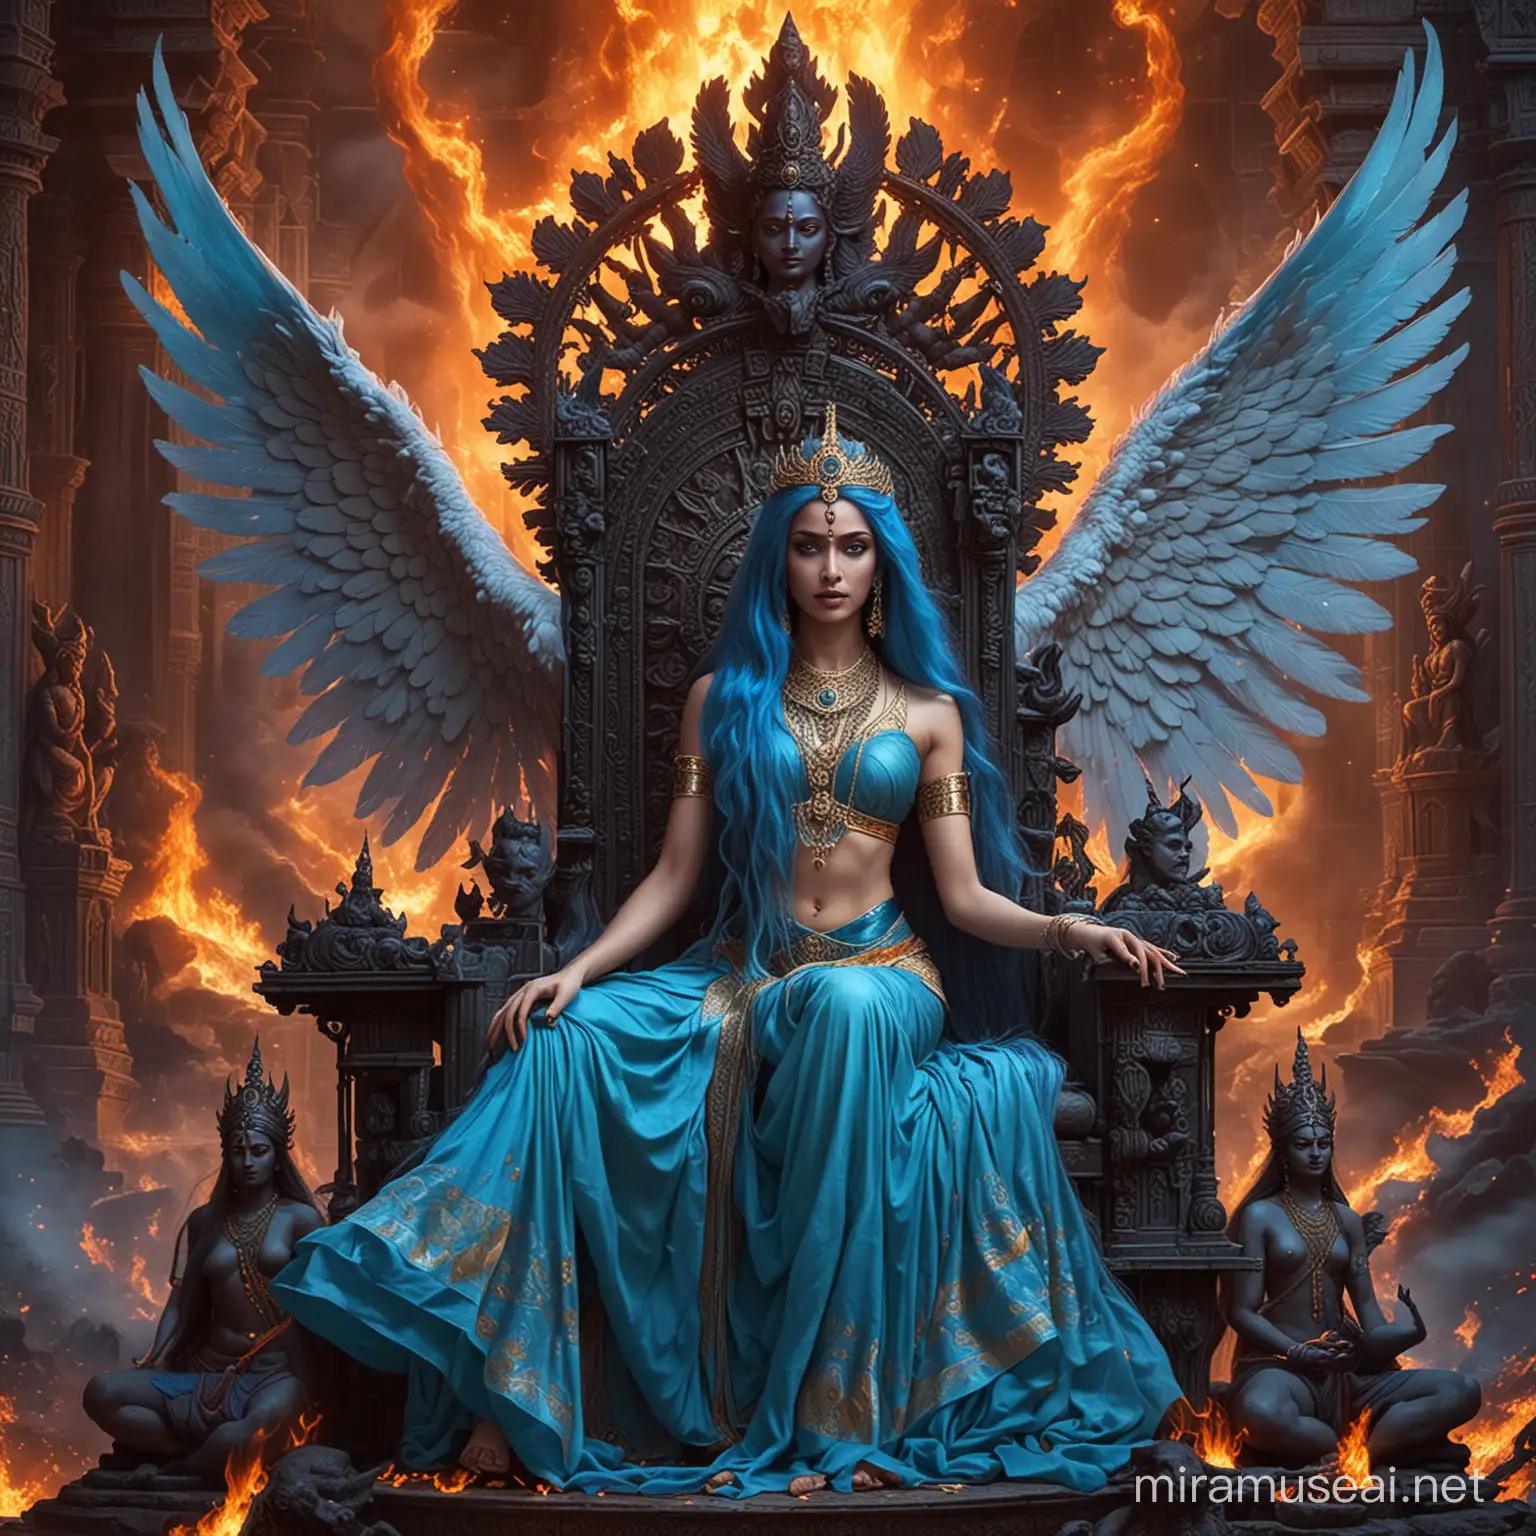 Majestic Hindu Empress Surrounded by Demonic Goddesses in a Dark Palace